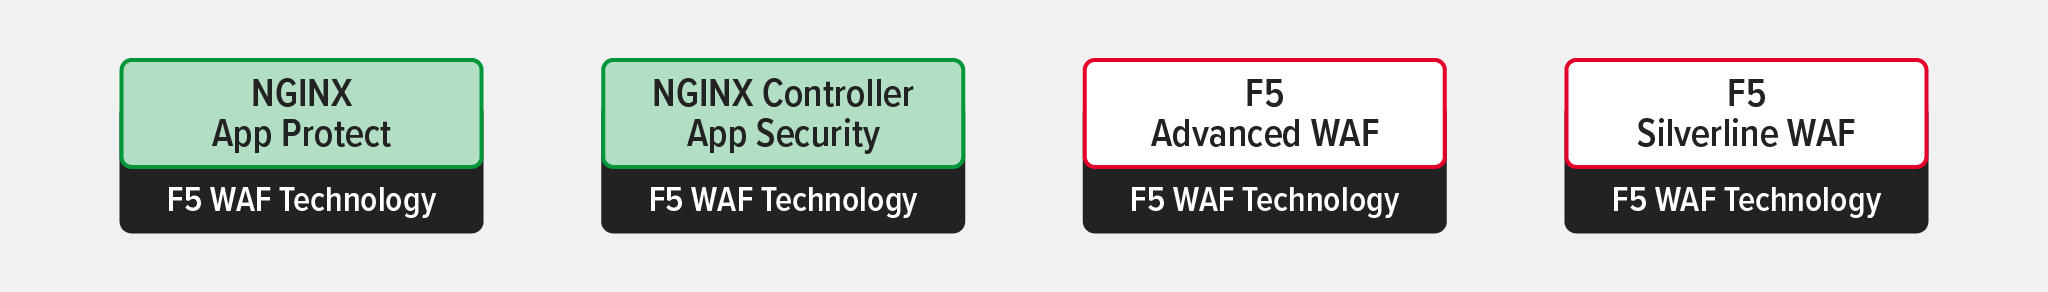 Products built on the shared F5 WAF engine: F5 NGINX App Protect, F5 NGINX Controller App Security, F5 Advanced WAF, F5 Silverline WAF